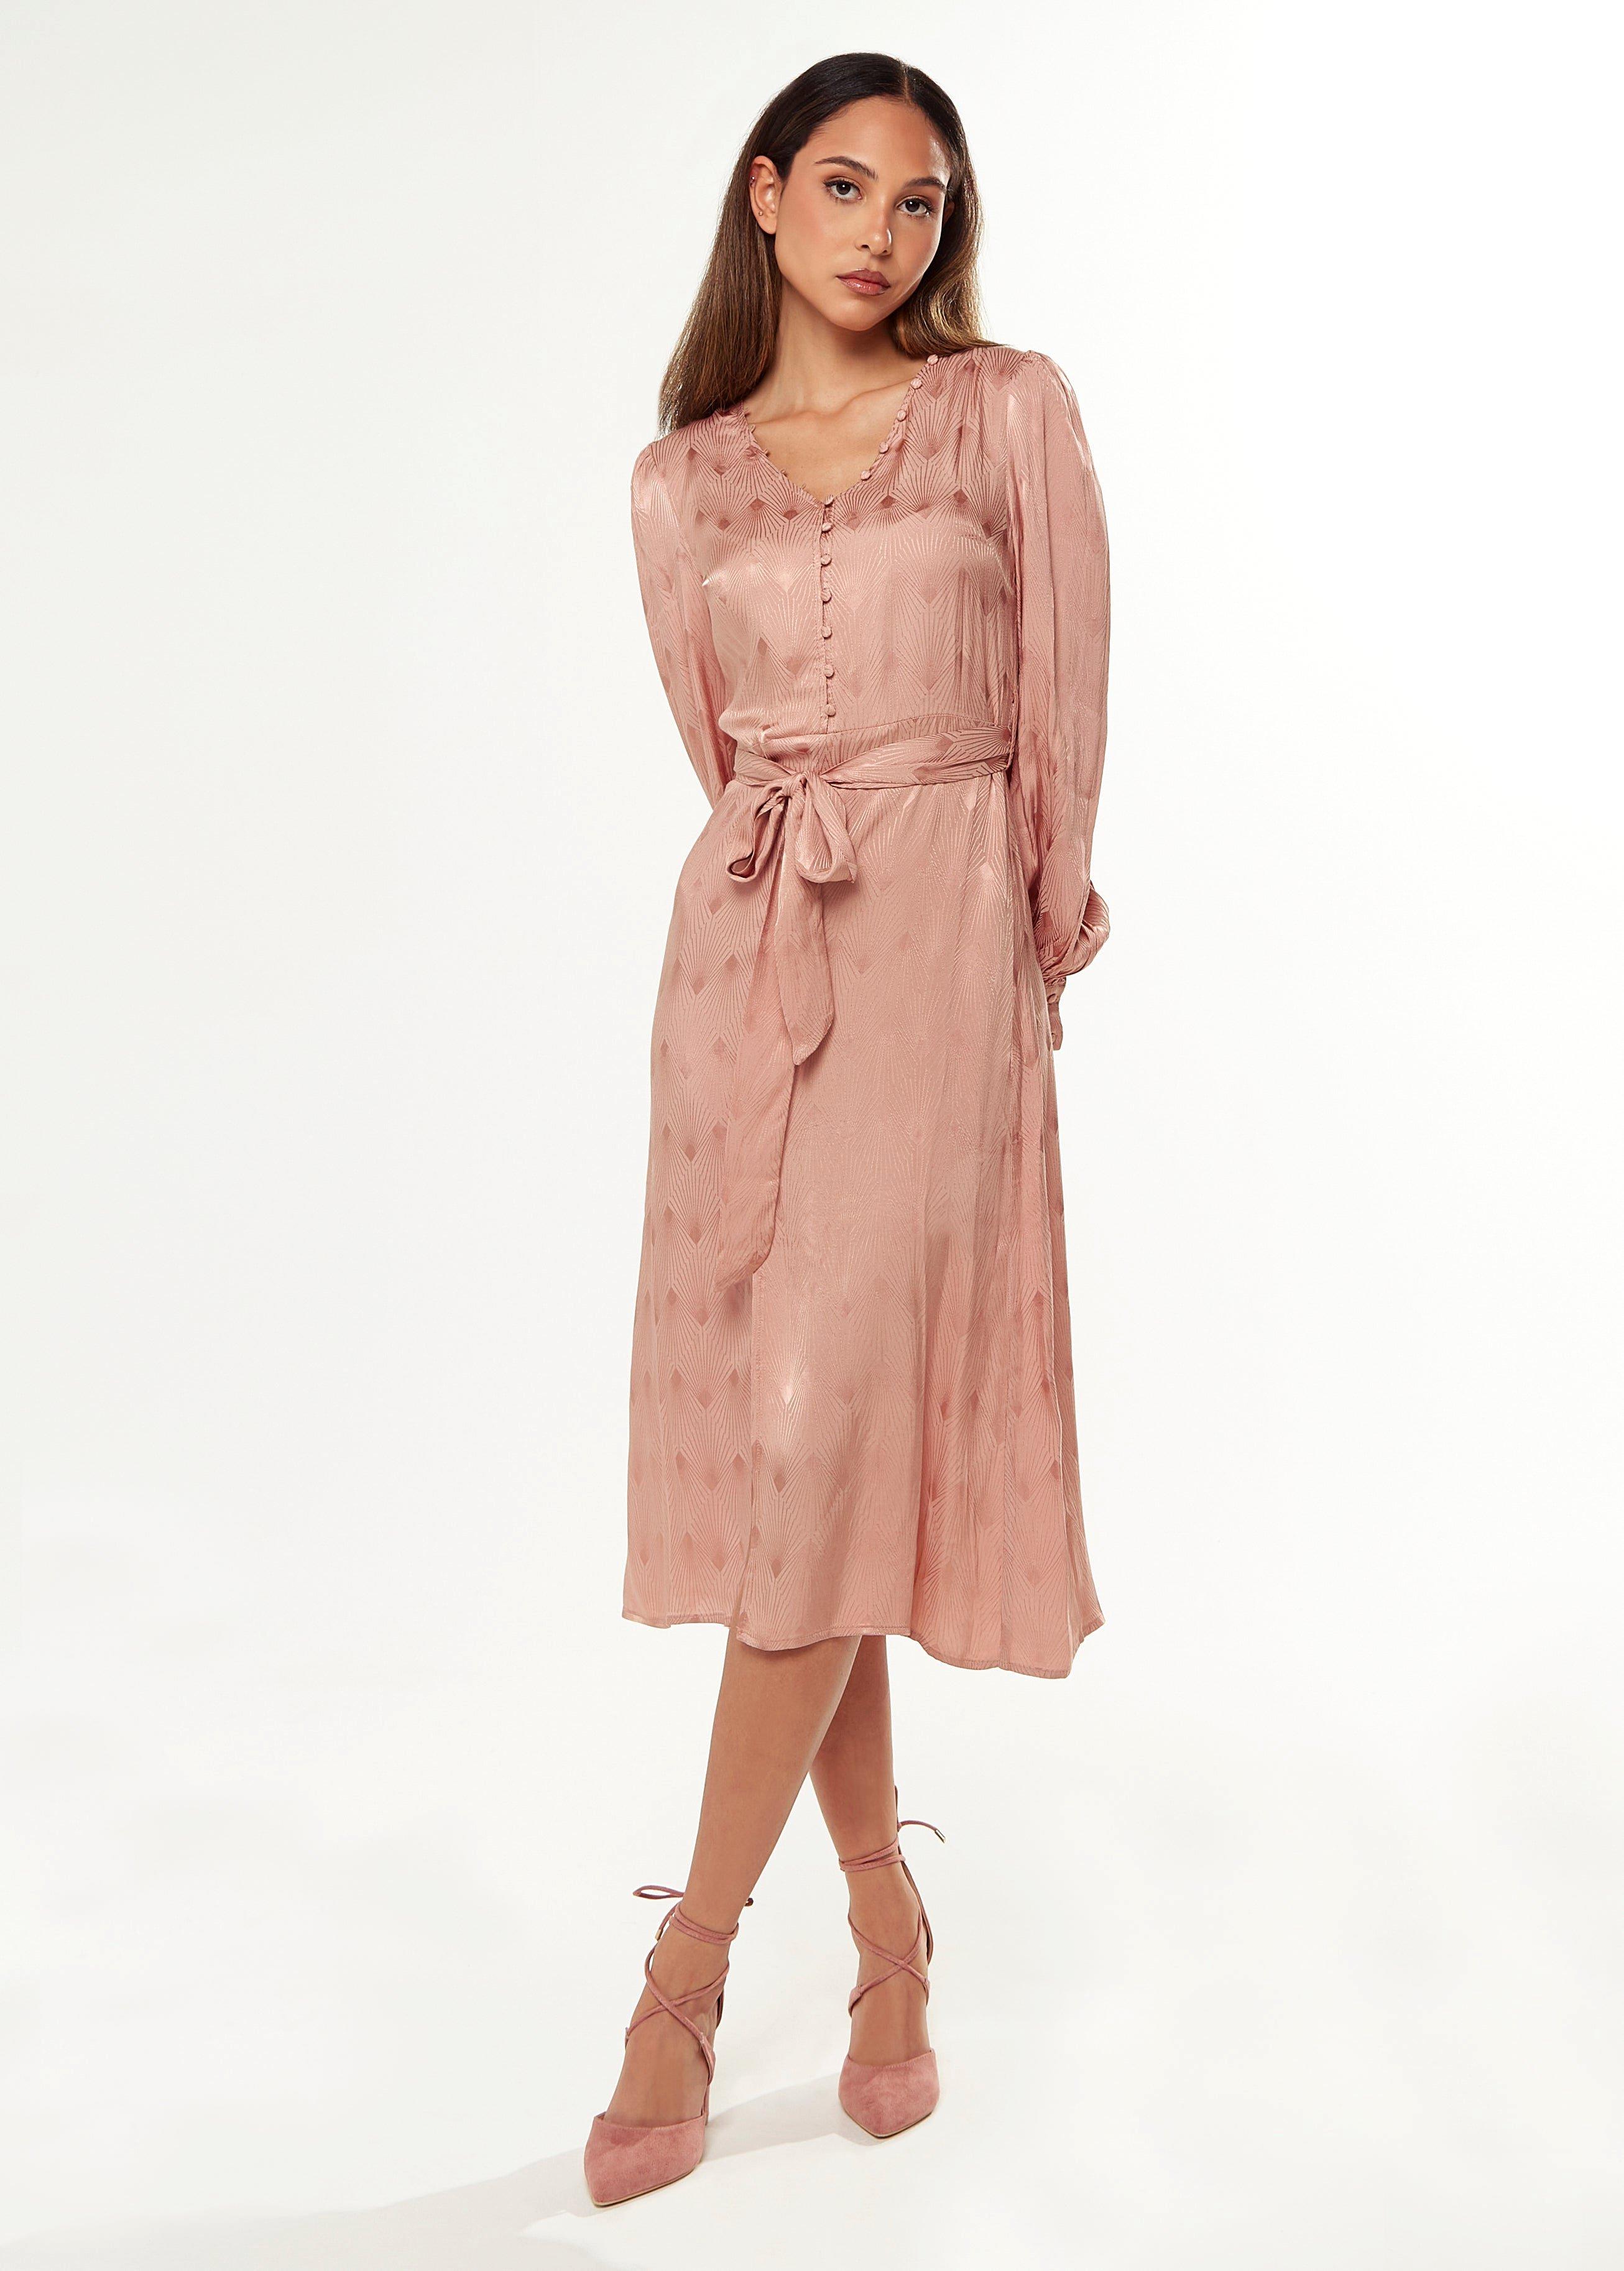 70s Style Jacquard Dress In Nude With Slit